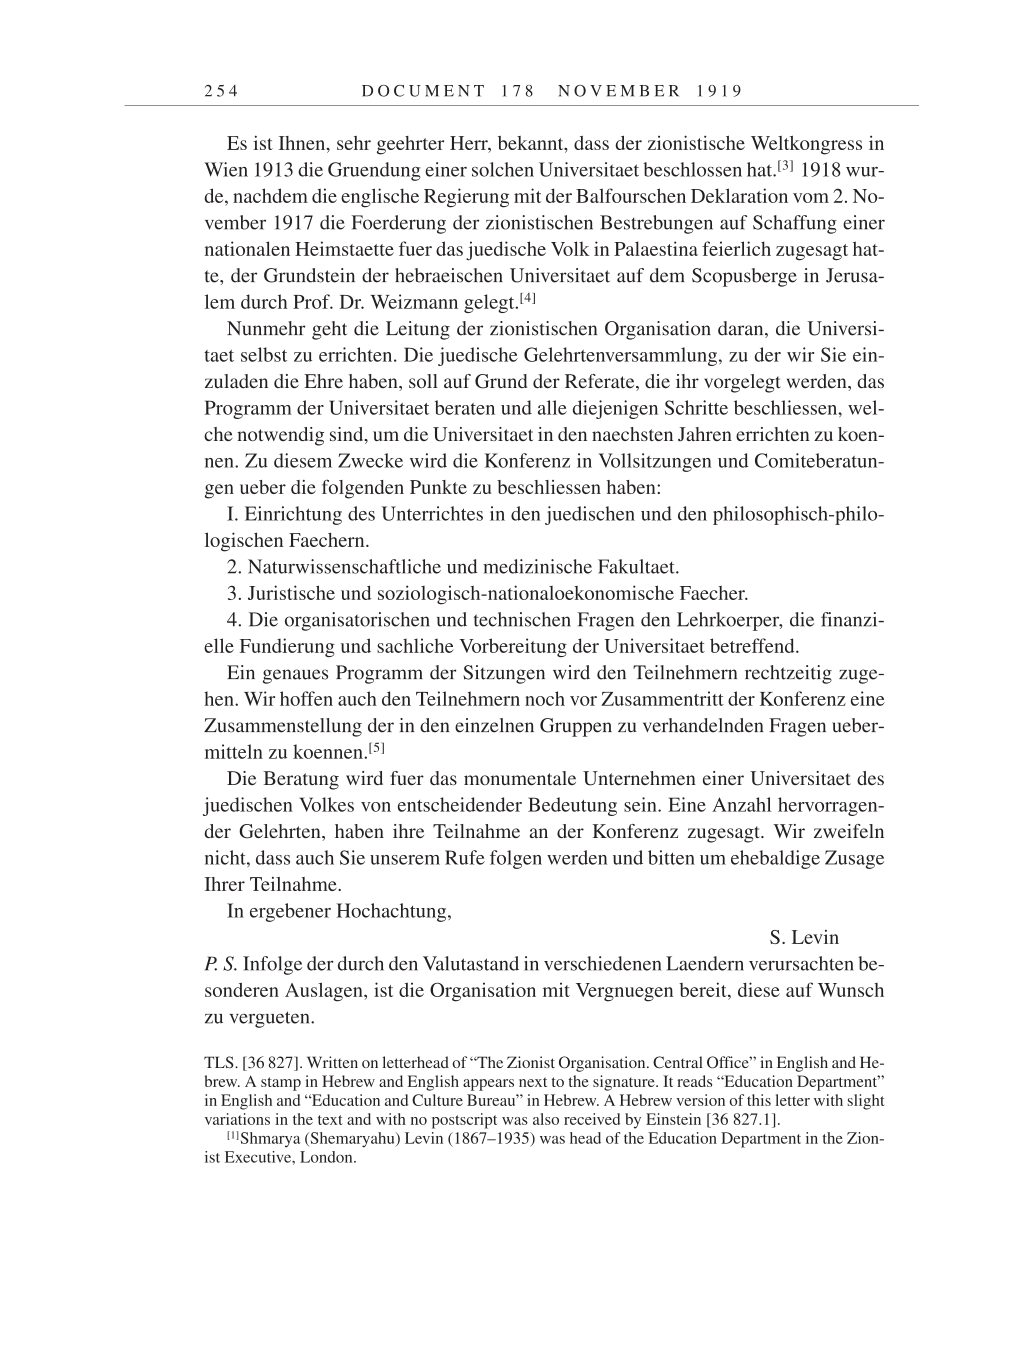 Volume 9: The Berlin Years: Correspondence January 1919-April 1920 page 254